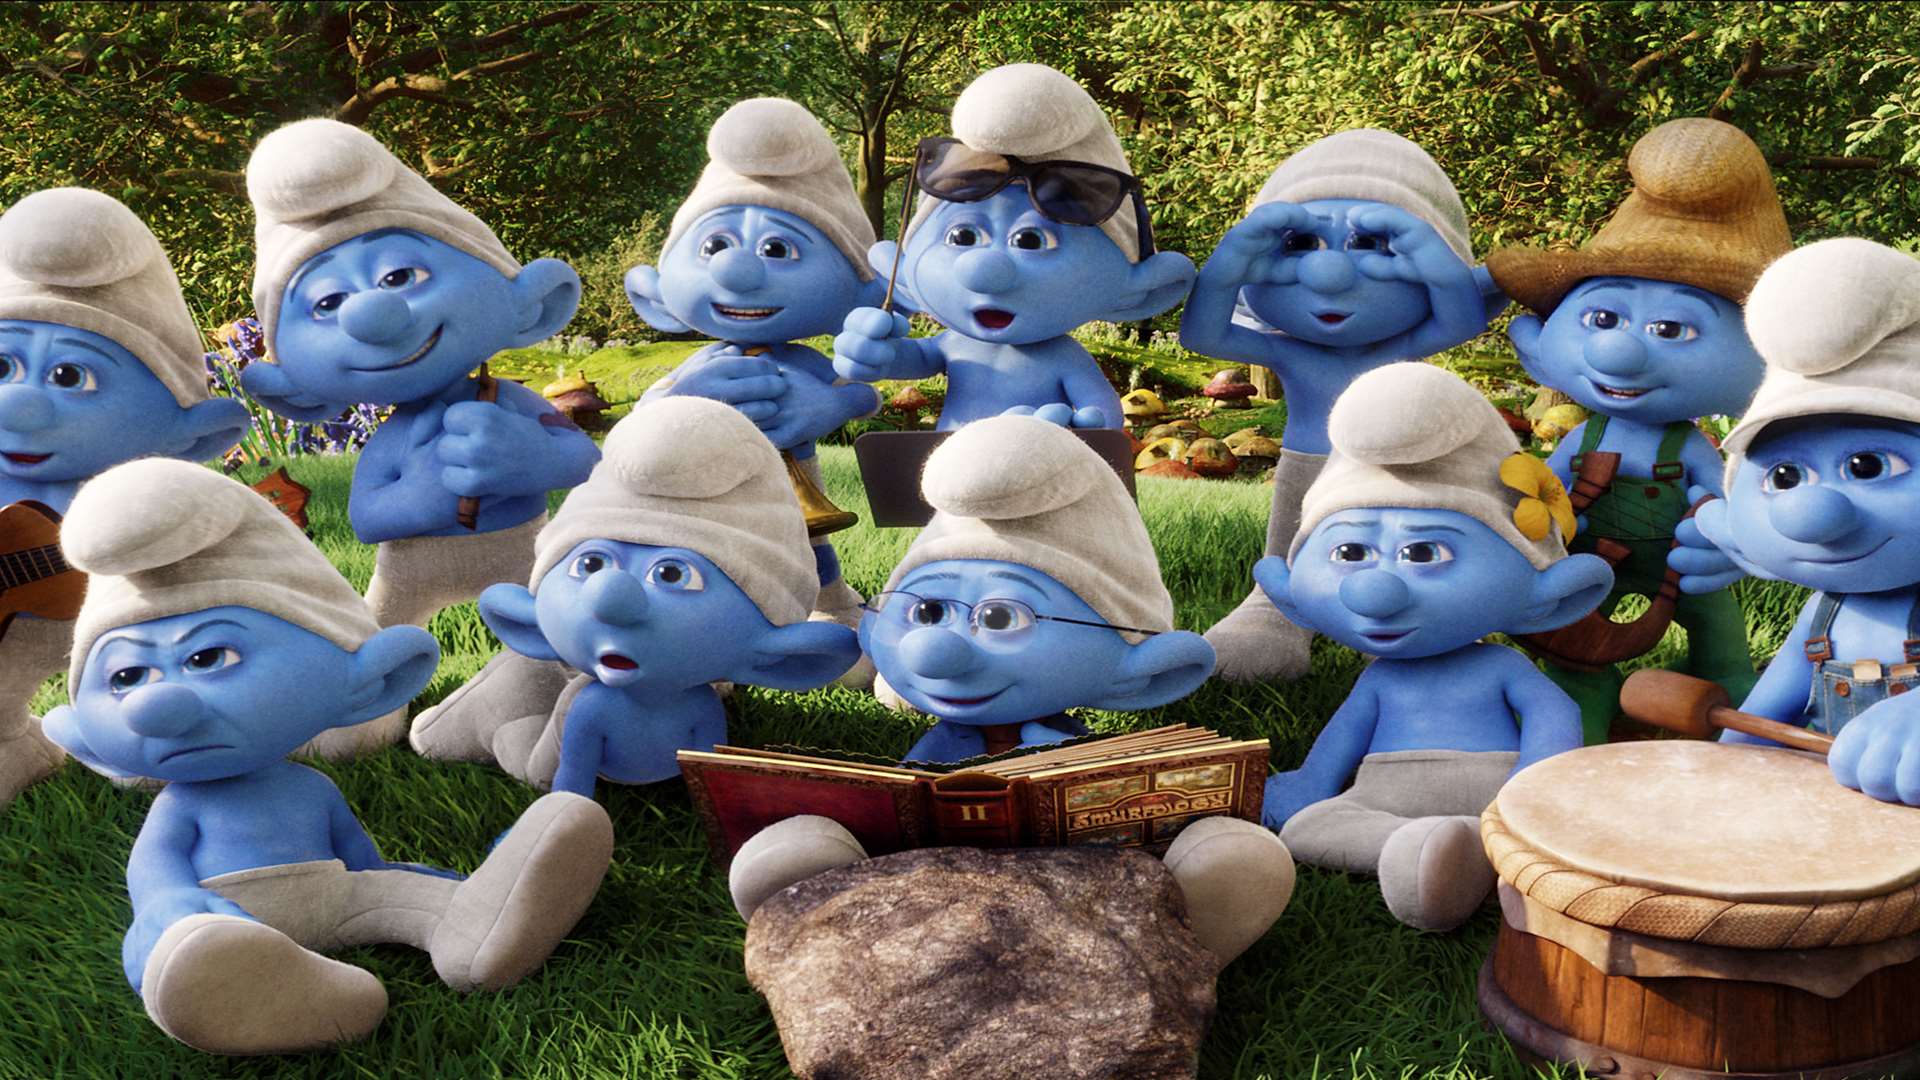 The Smurfs 2 with a group of Smurfs in Smurf Village. Picture: PA Photo/Sony Pictures UK.